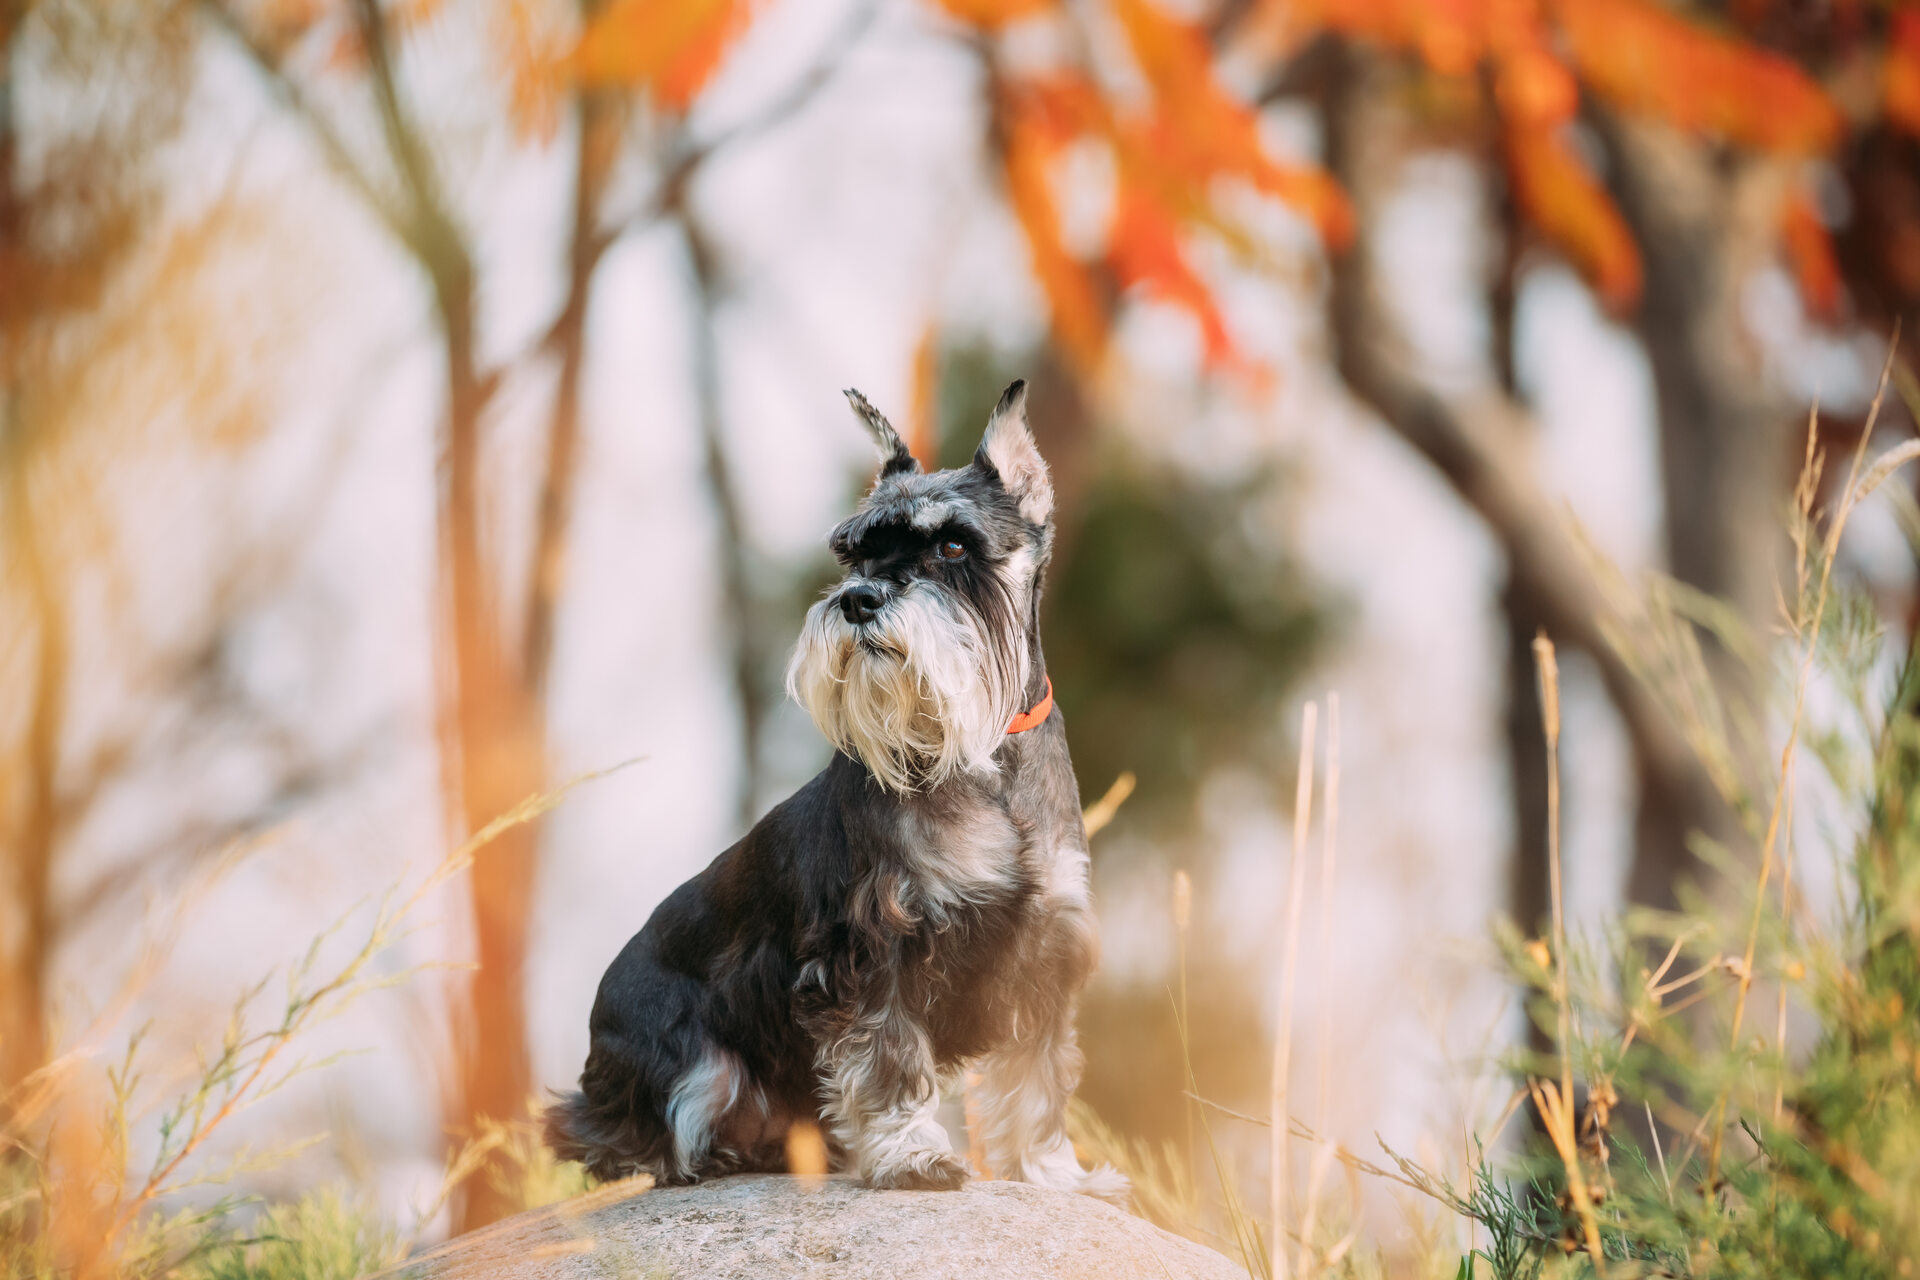 A MIniature Schnauzer in a forested area